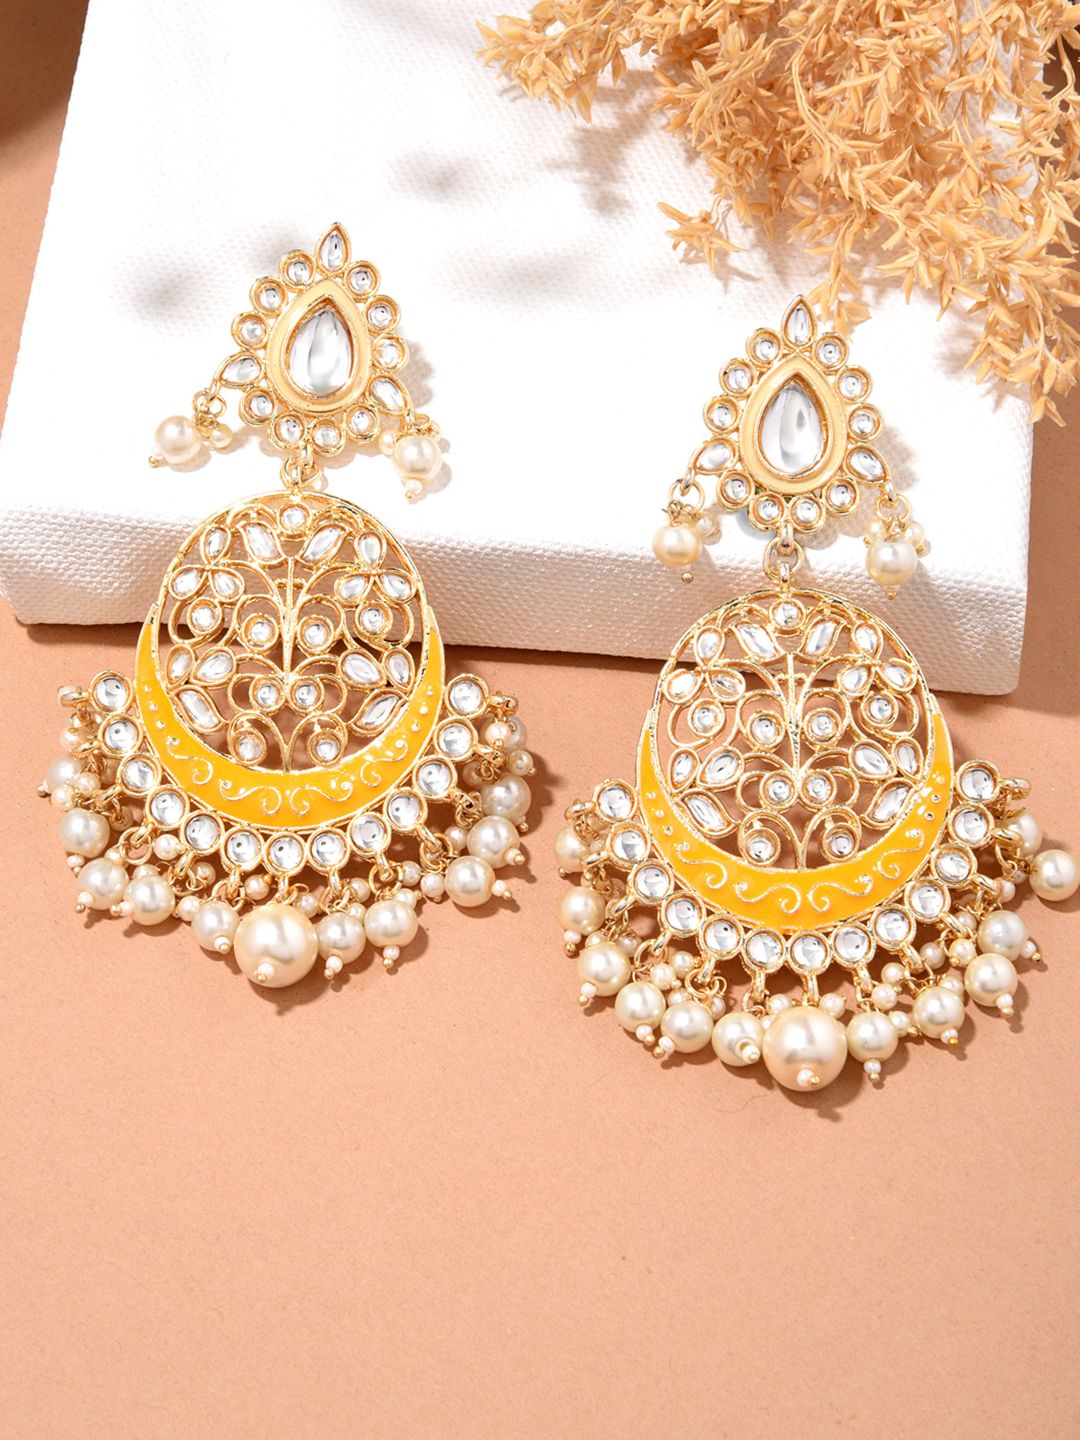 Fida Gold-Toned Contemporary Chandbalis Earrings Price in India